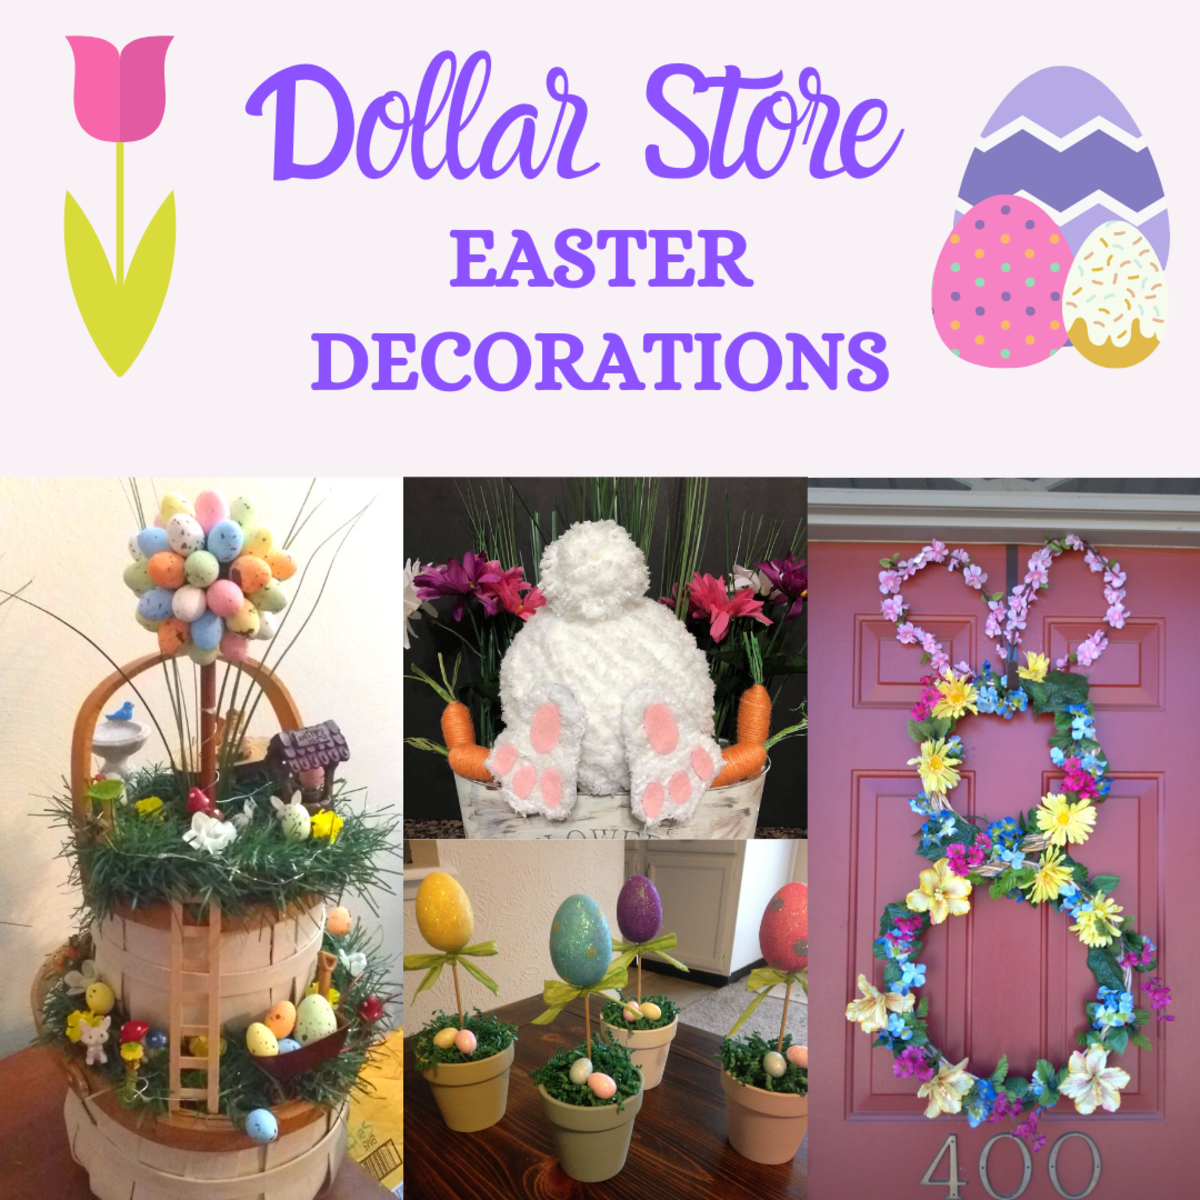 Save money while decorating for Easter by buying supplies at a dollar store. You can find so many cute things!